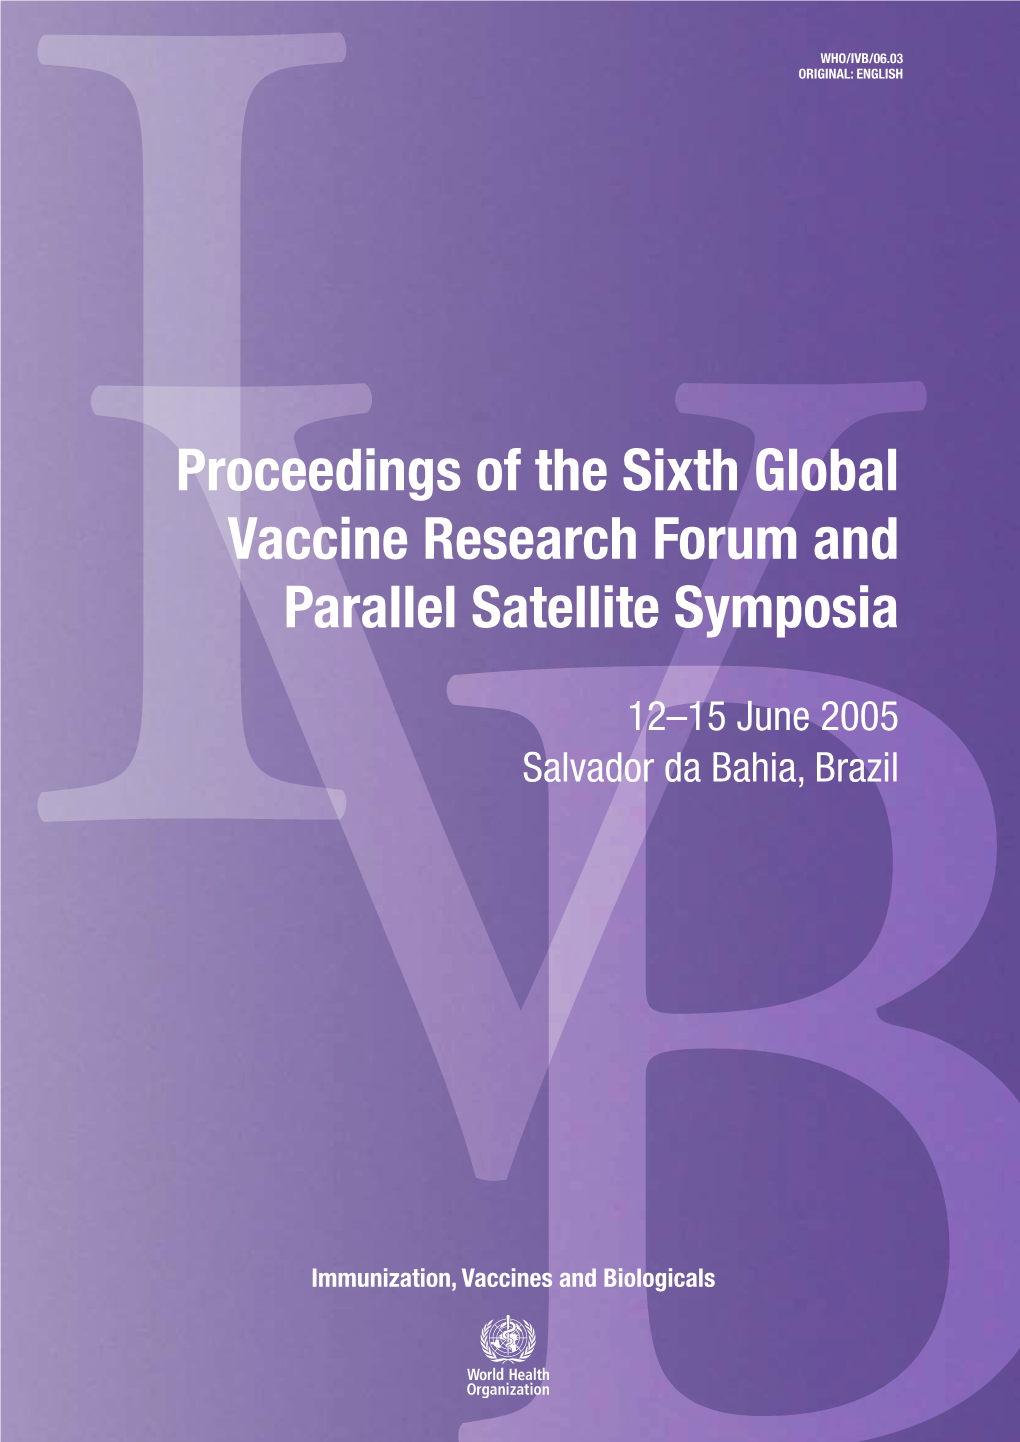 Proceedings of the Sixth Global Vaccine Research Forum and Parallel Satellite Symposia